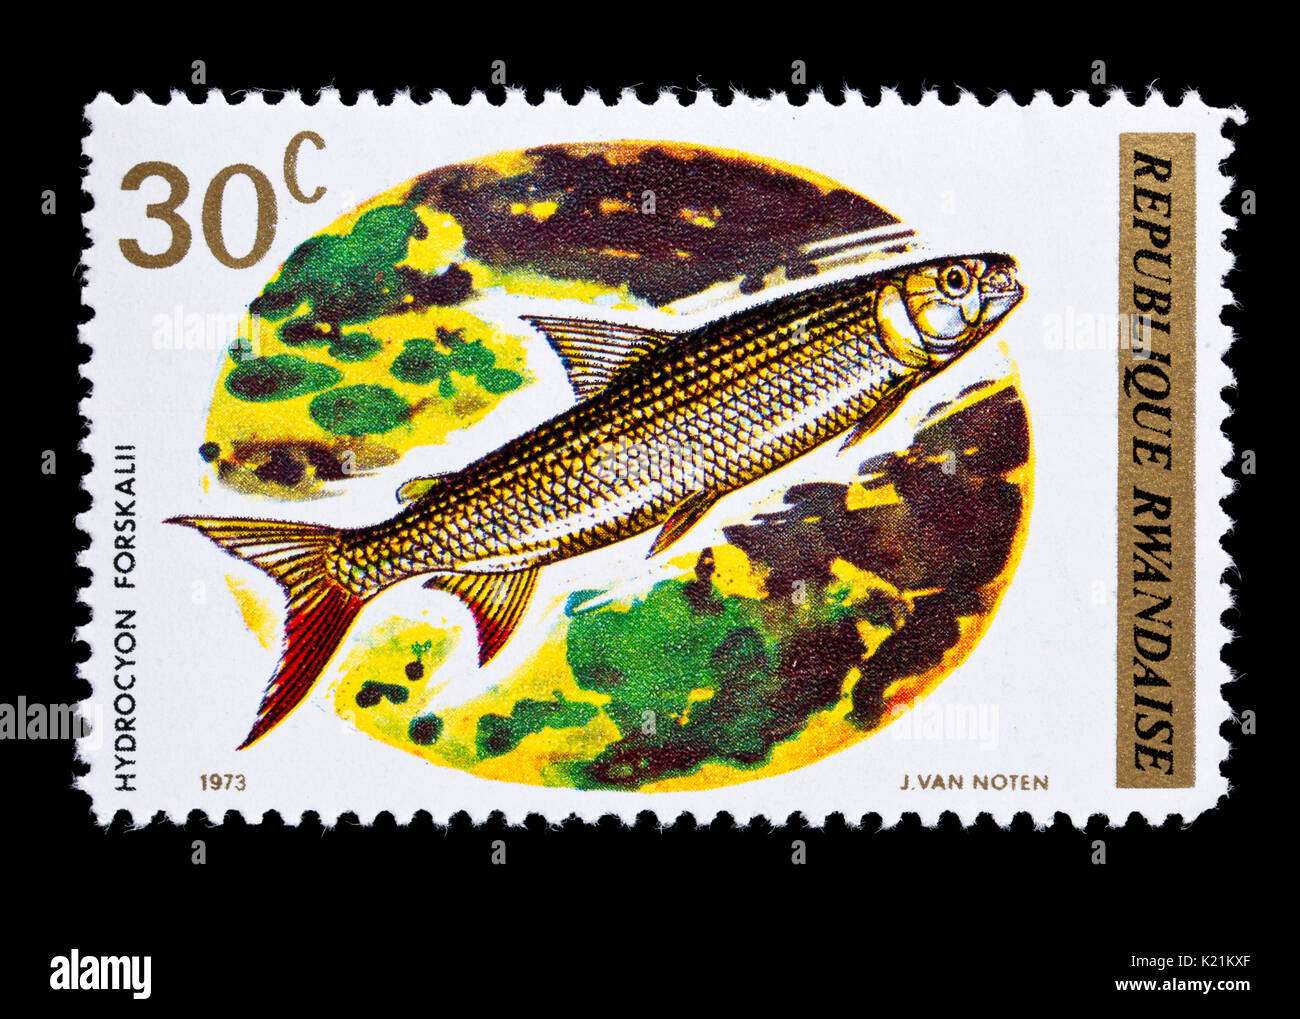 Postage stamp from Rwanda depicting a Elongate tigerfish (Hydrocynus forskahlii) Stock Photo